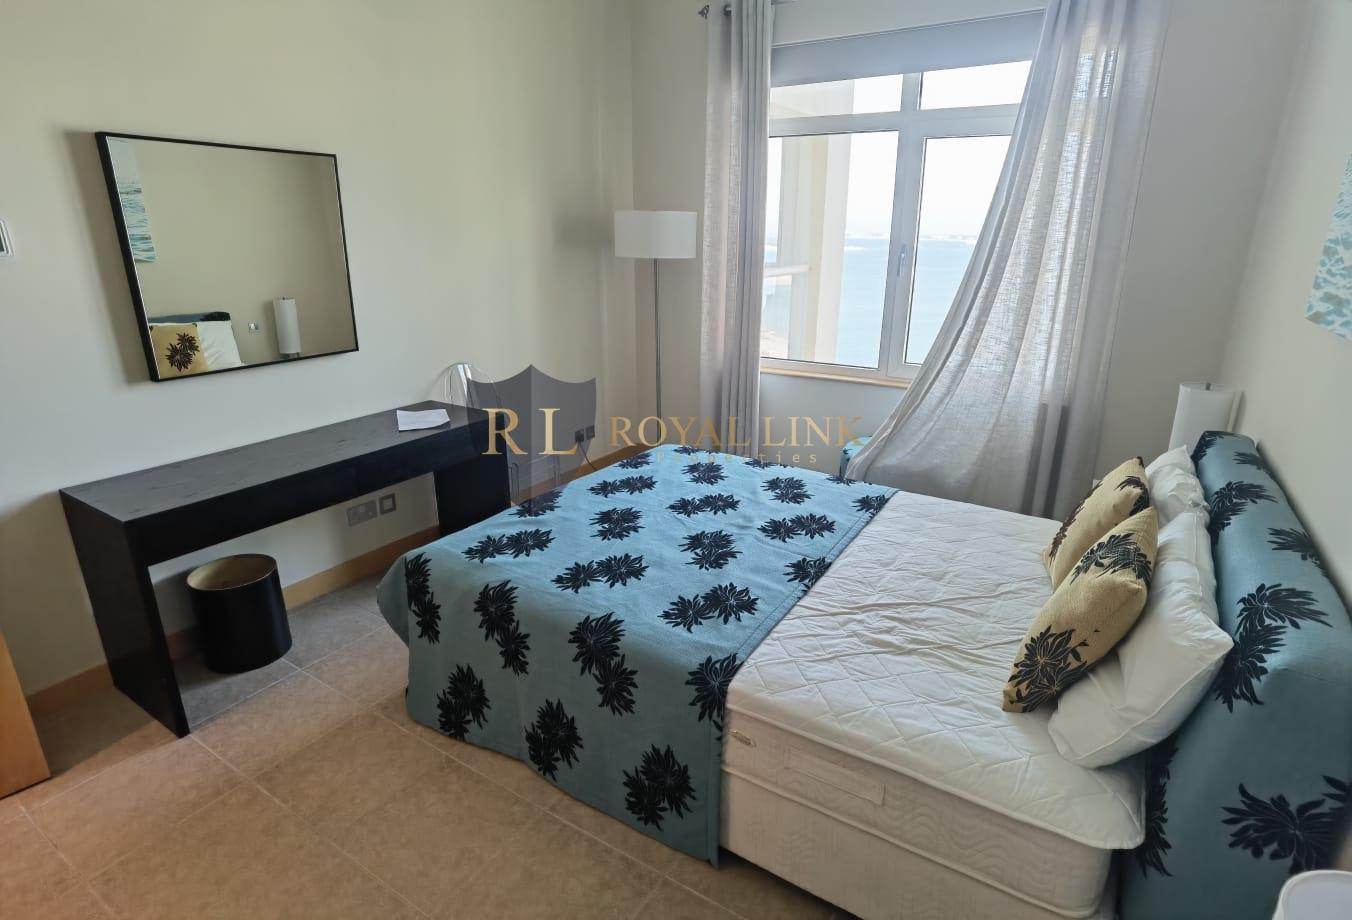 2 bed, 3 bath Apartment for rent in Al Das, Shoreline Apartments, Palm Jumeirah, Dubai for price AED 274000 yearly 